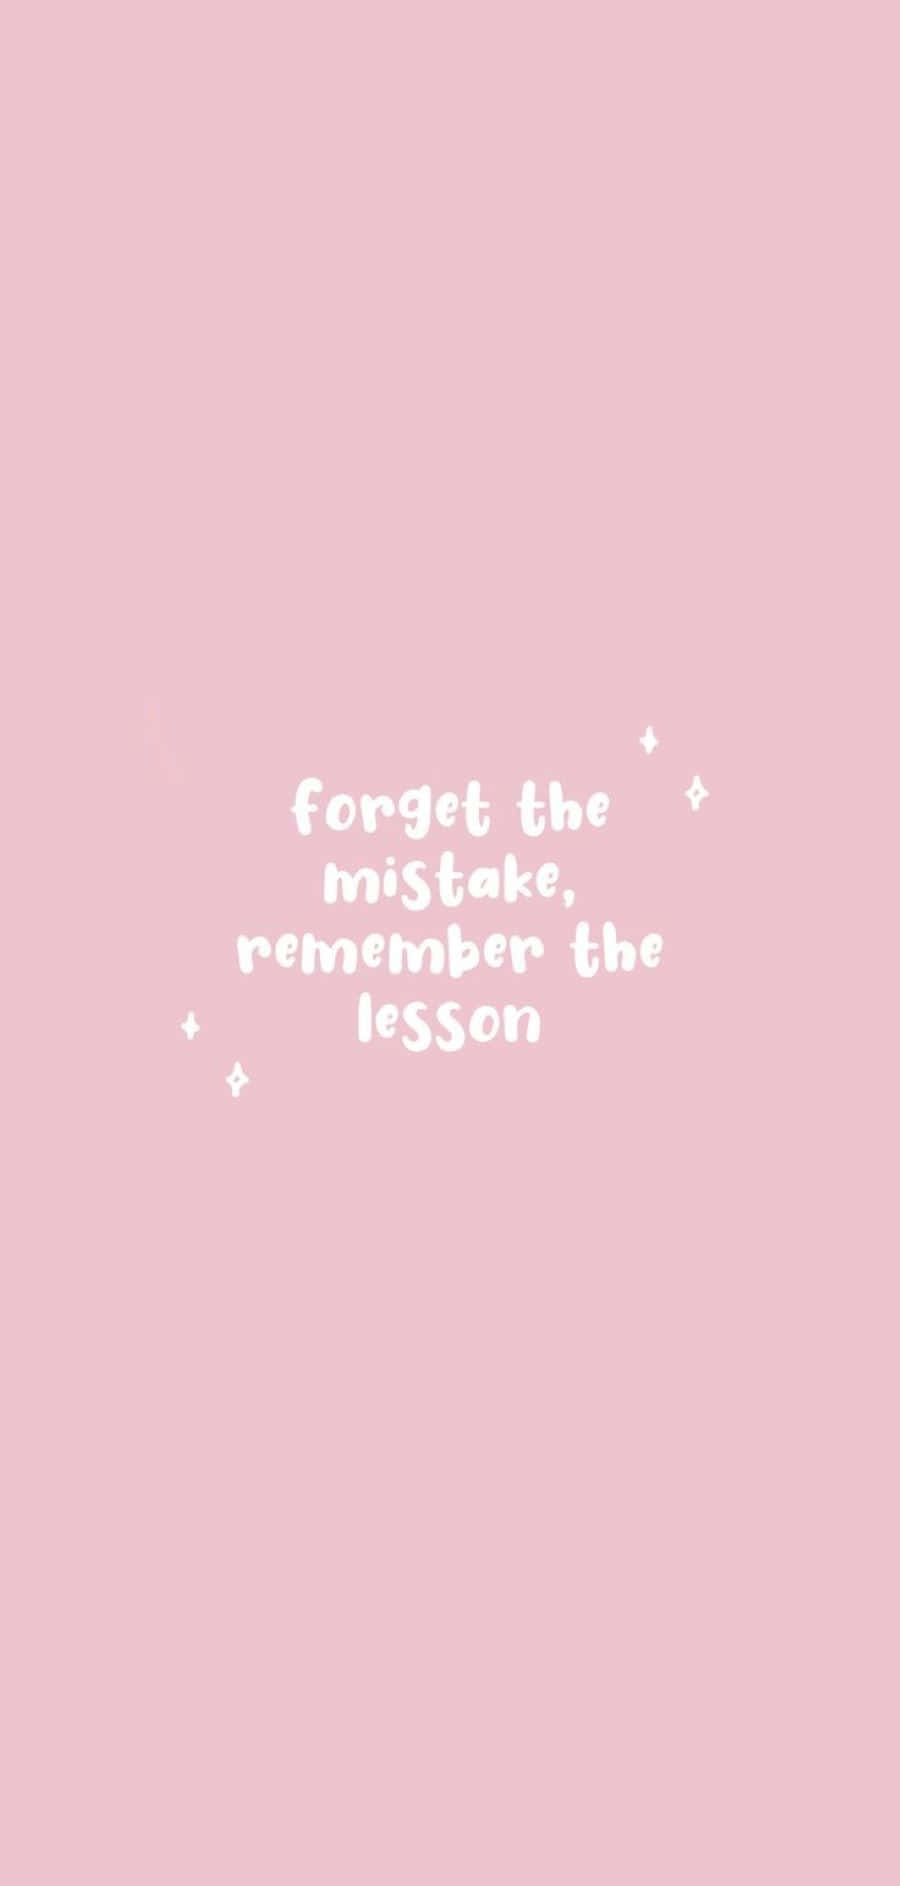 Positive Lesson Quote Pink Background Wallpaper